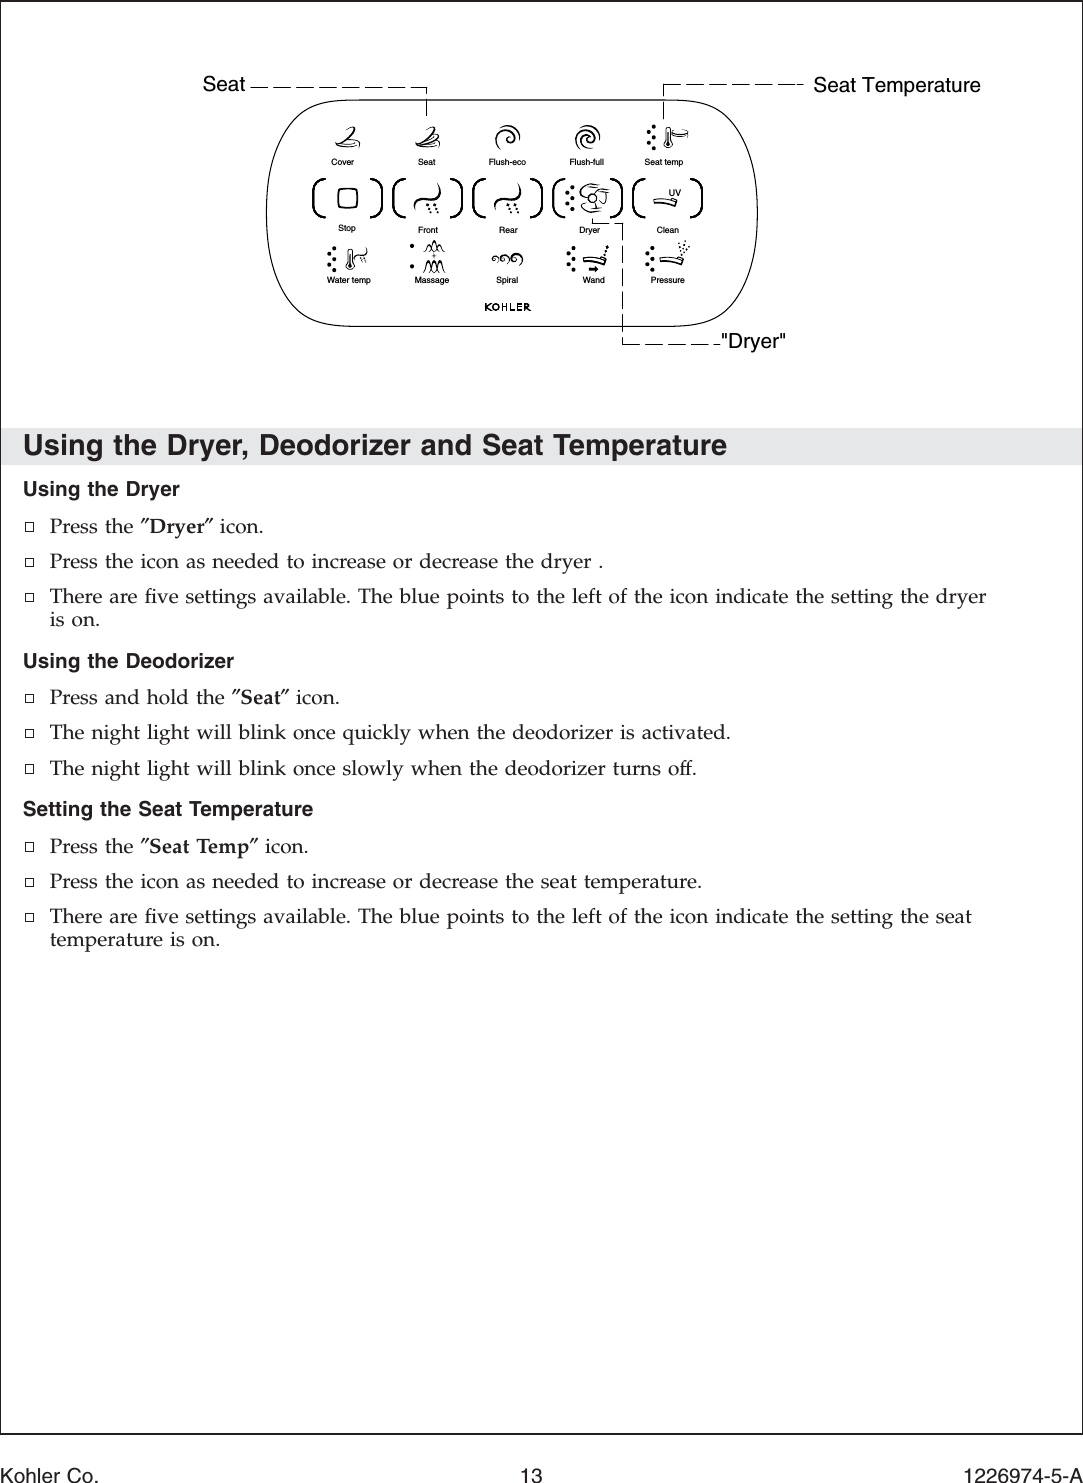 Using the Dryer, Deodorizer and Seat TemperatureUsing the DryerPress the ″Dryer″icon.Press the icon as needed to increase or decrease the dryer .There are ﬁve settings available. The blue points to the left of the icon indicate the setting the dryeris on.Using the DeodorizerPress and hold the ″Seat″icon.The night light will blink once quickly when the deodorizer is activated.The night light will blink once slowly when the deodorizer turns off.Setting the Seat TemperaturePress the ″Seat Temp″icon.Press the icon as needed to increase or decrease the seat temperature.There are ﬁve settings available. The blue points to the left of the icon indicate the setting the seattemperature is on.Seat Seat Temperature&quot;Dryer&quot;Seat temp Flush-fullFlush-ecoSeatClean Dryer RearFrontPressureandWSpiralMassageater tempWStop Cover UVKohler Co. 13 1226974-5-A